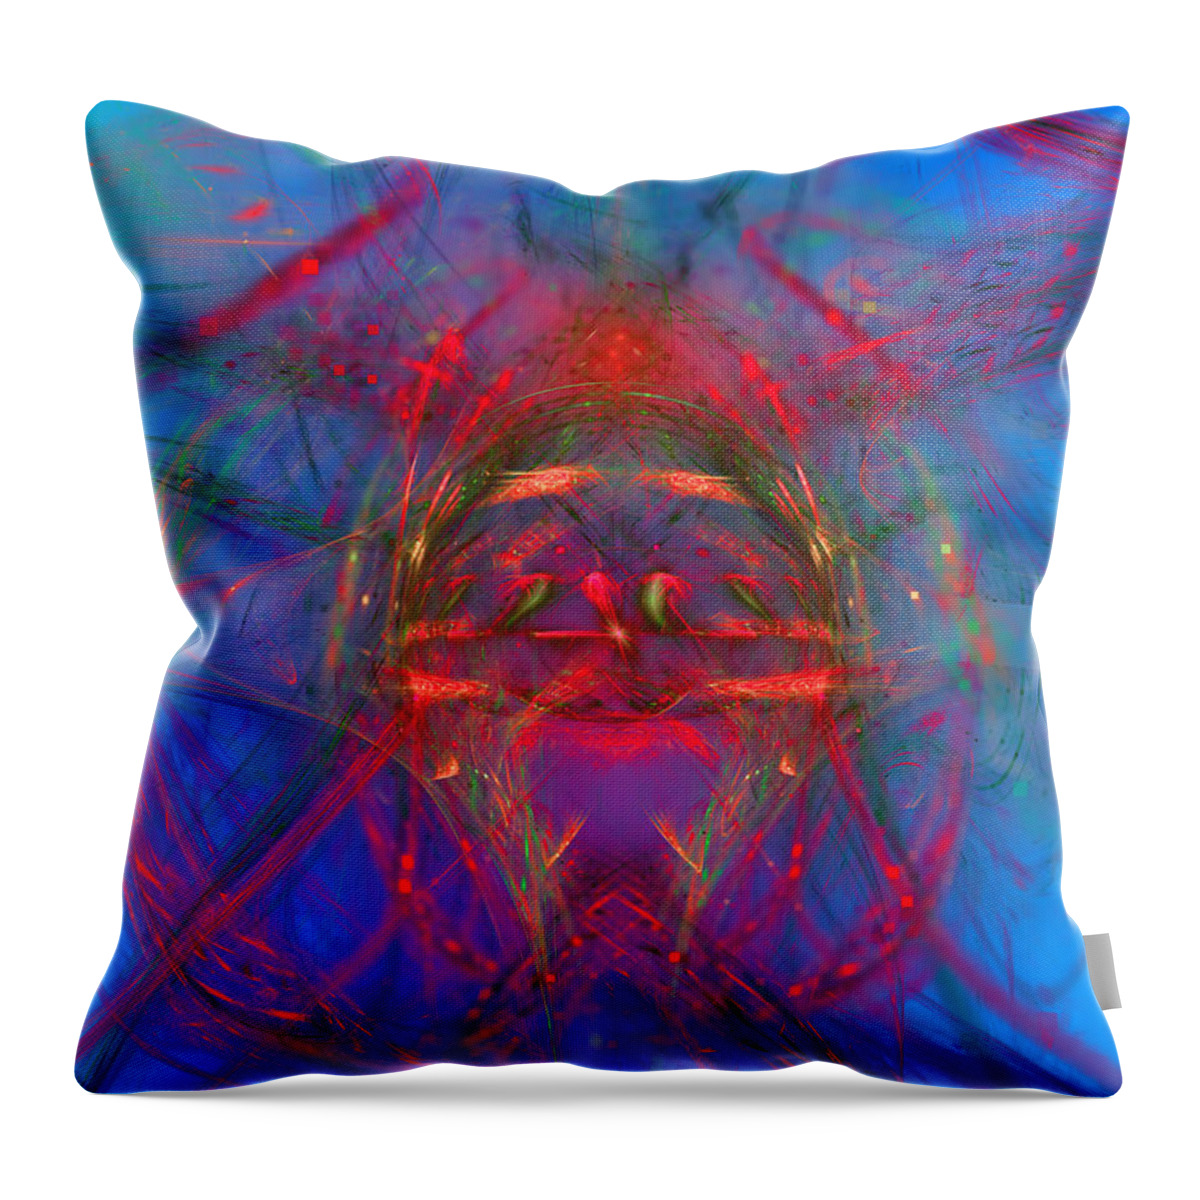 Art Throw Pillow featuring the digital art Beautiful Minds by Jeff Iverson